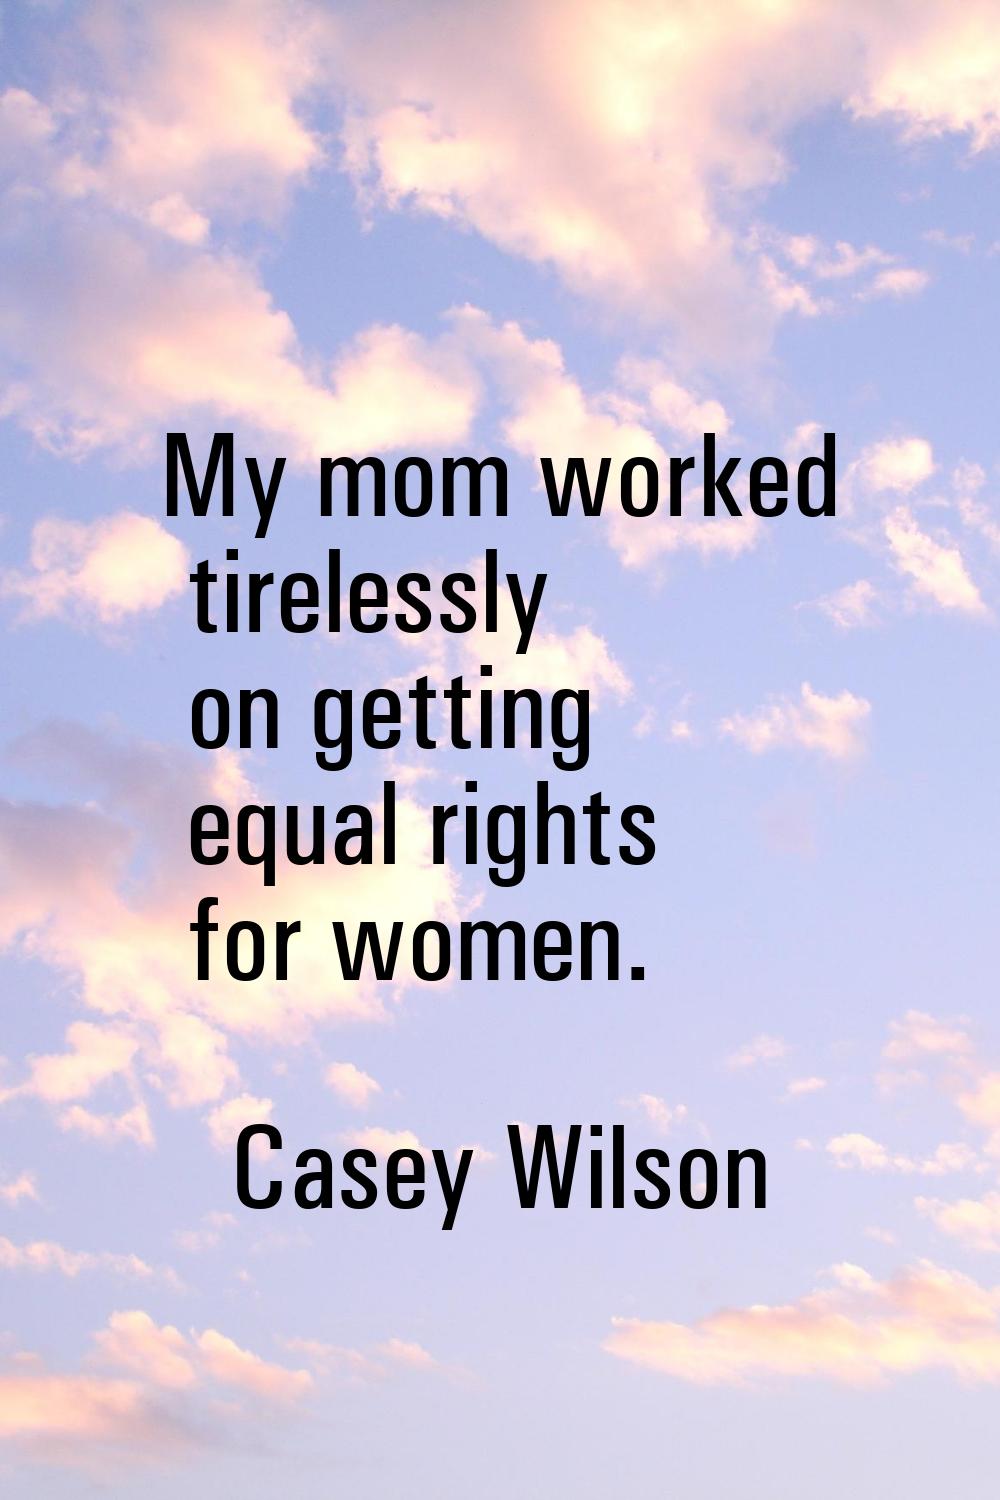 My mom worked tirelessly on getting equal rights for women.